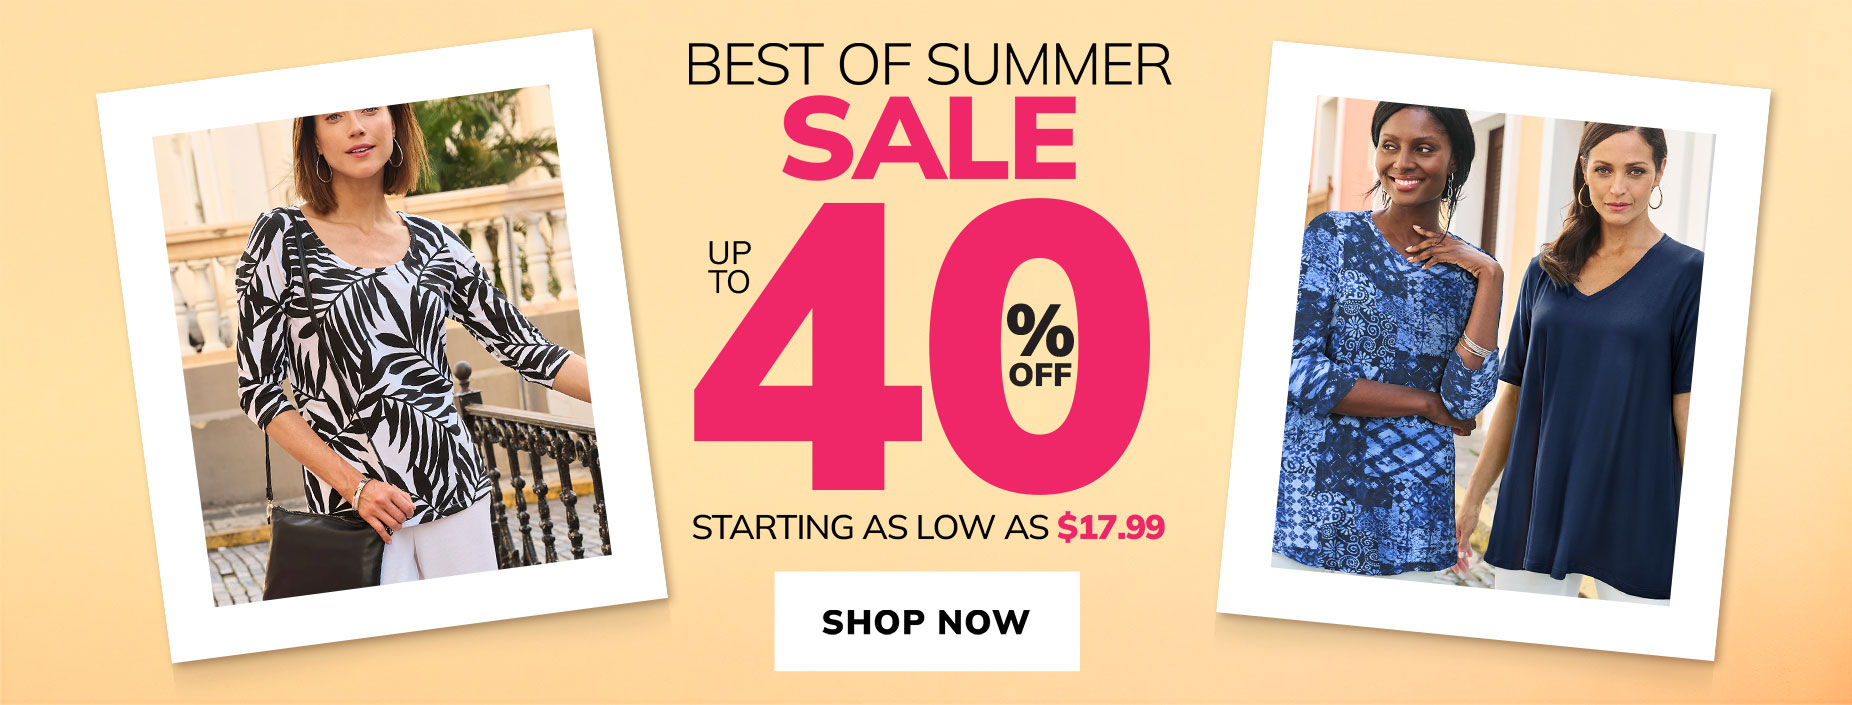 BEST OF SUMMER SALE - up to 40% OFF